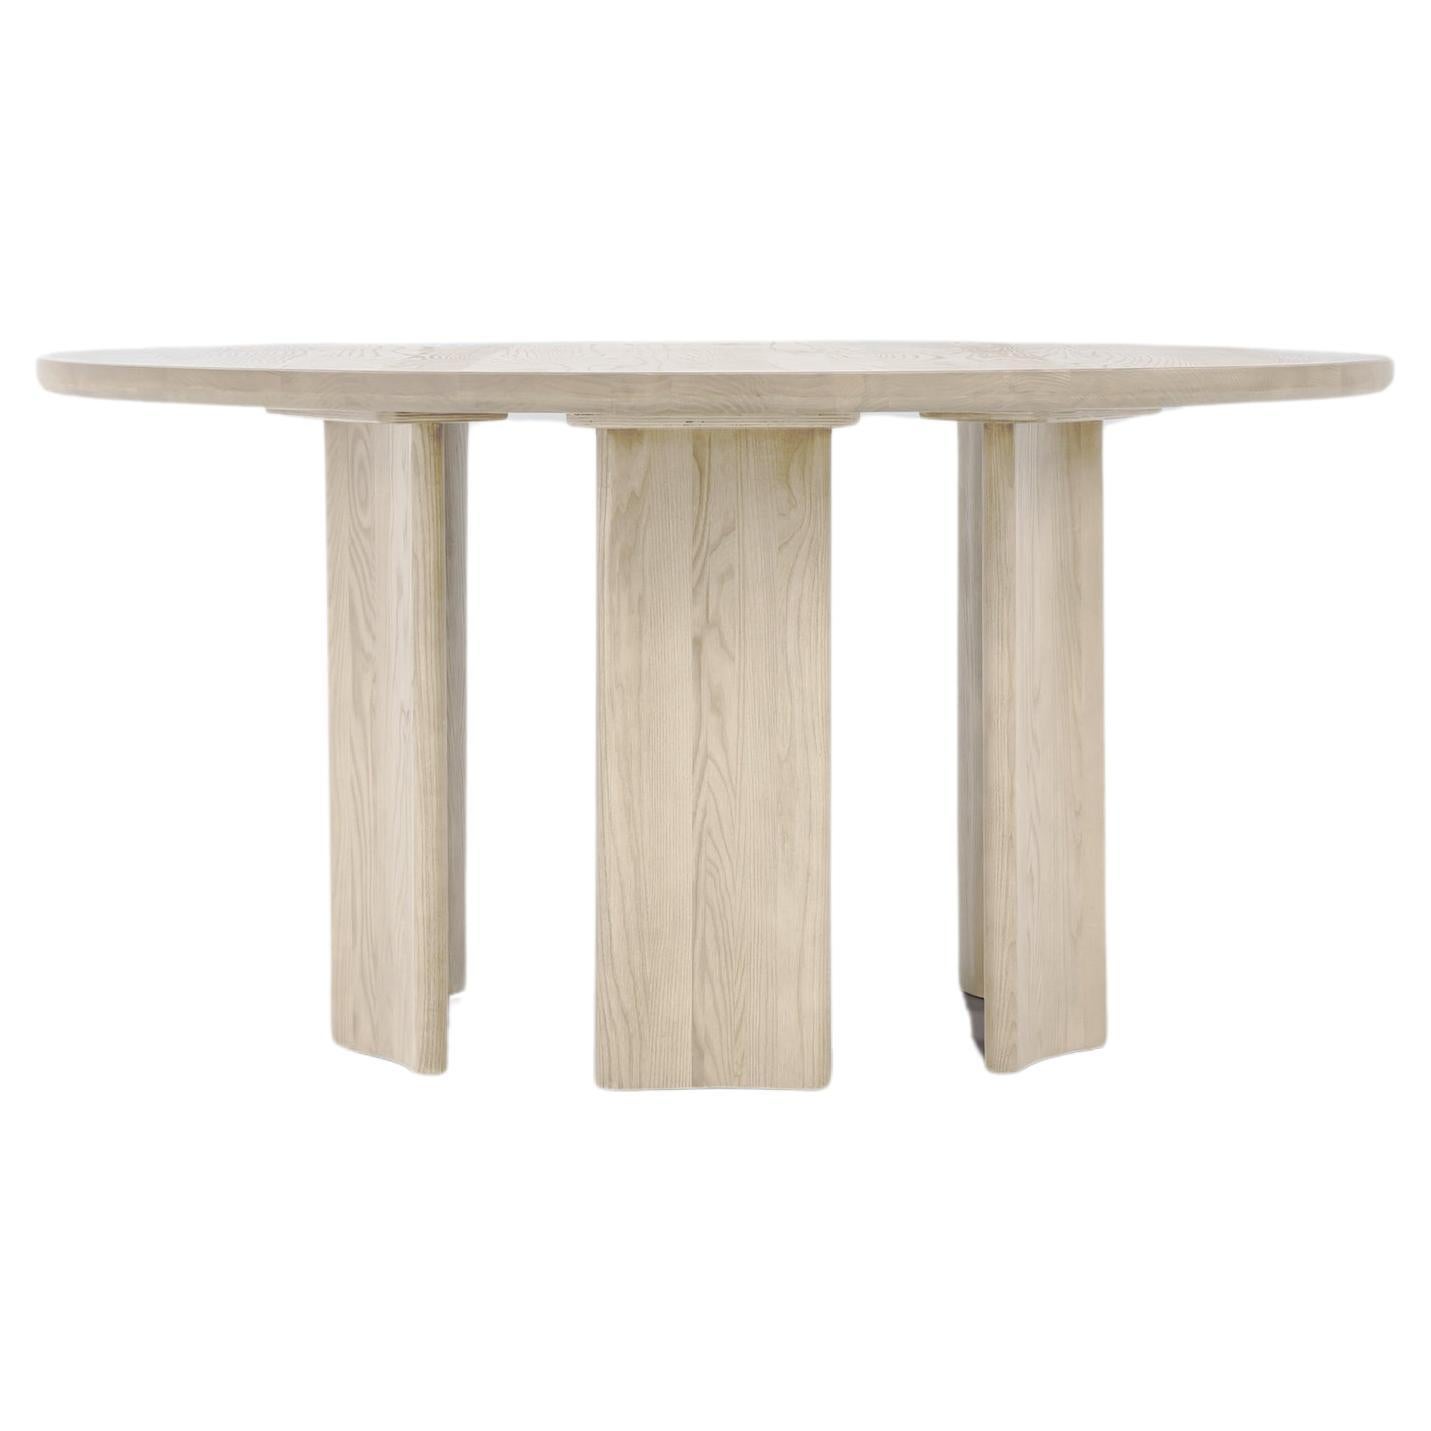 Crest Table Round in Nude, Minimalist Dining Table in FSC White Ash Wood For Sale